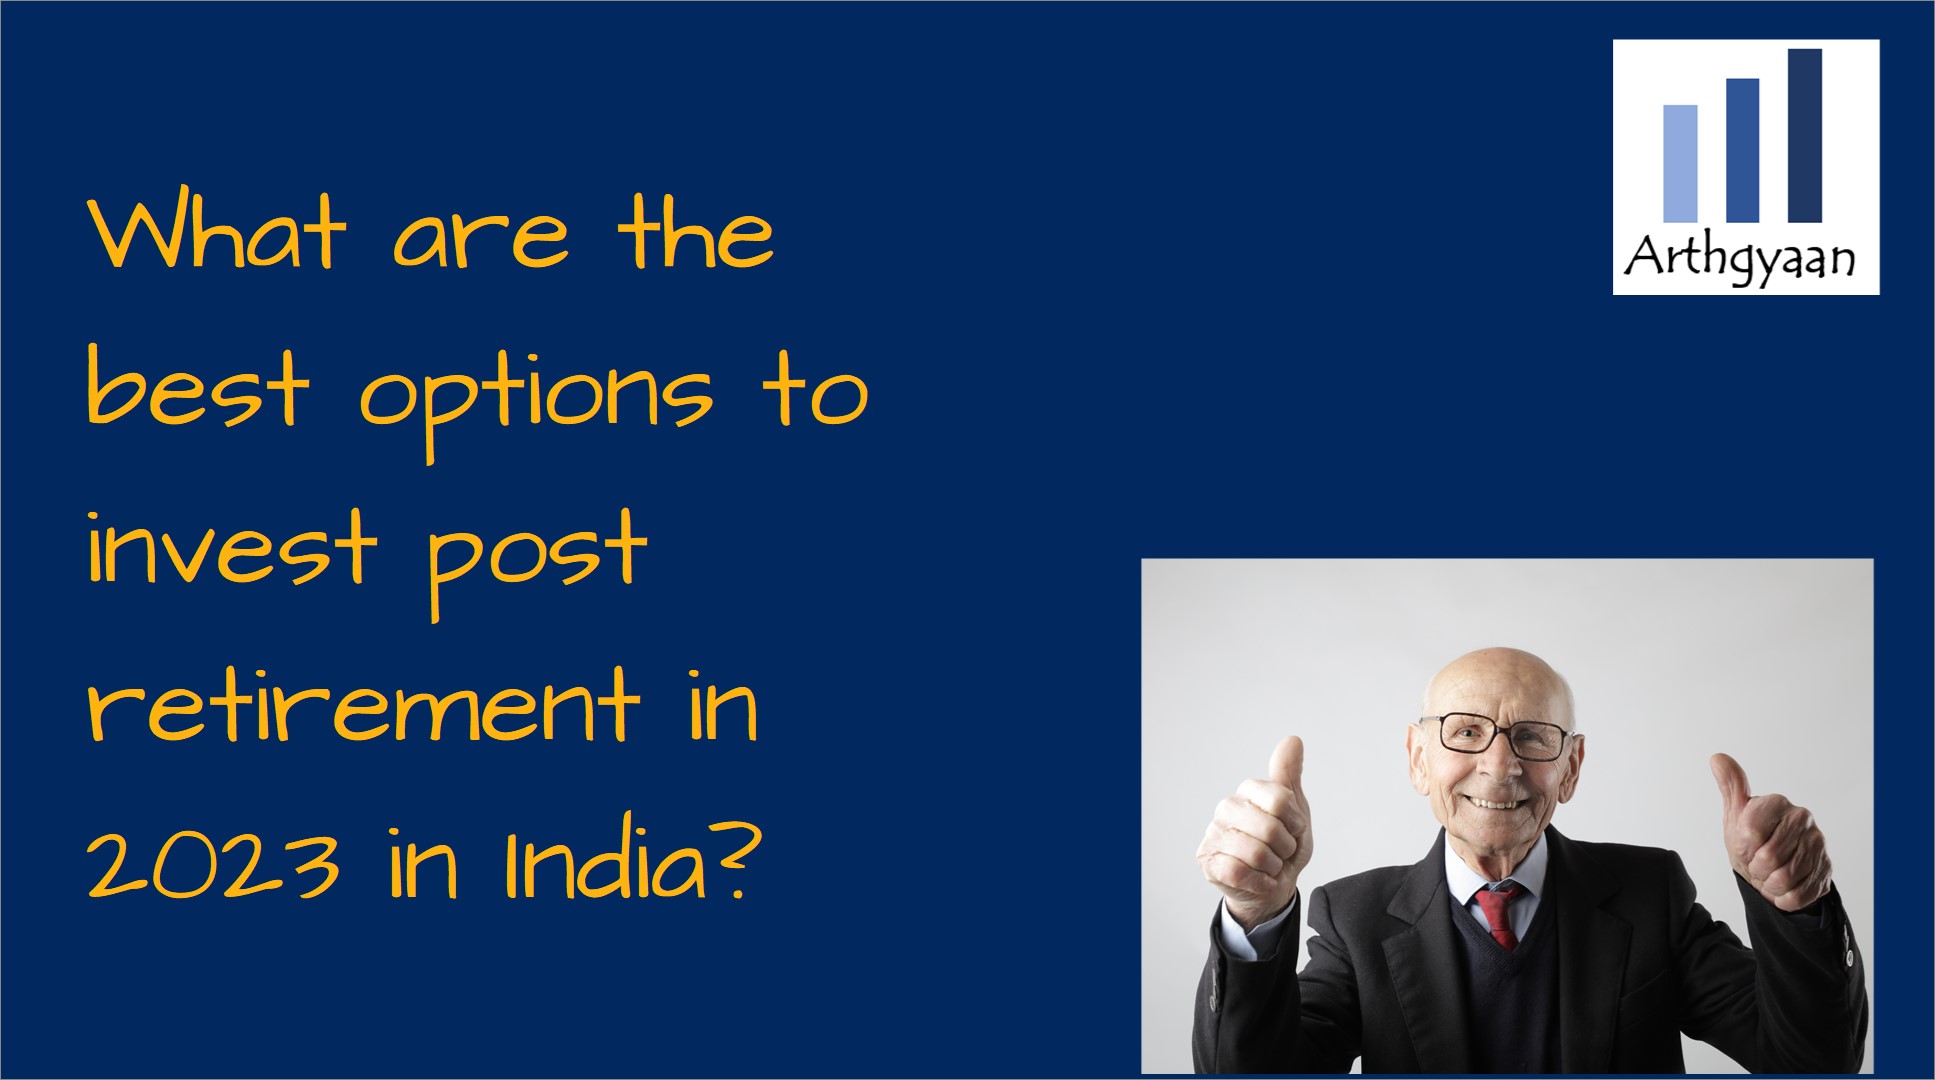 What are the best options to invest post retirement in 2023 in India?